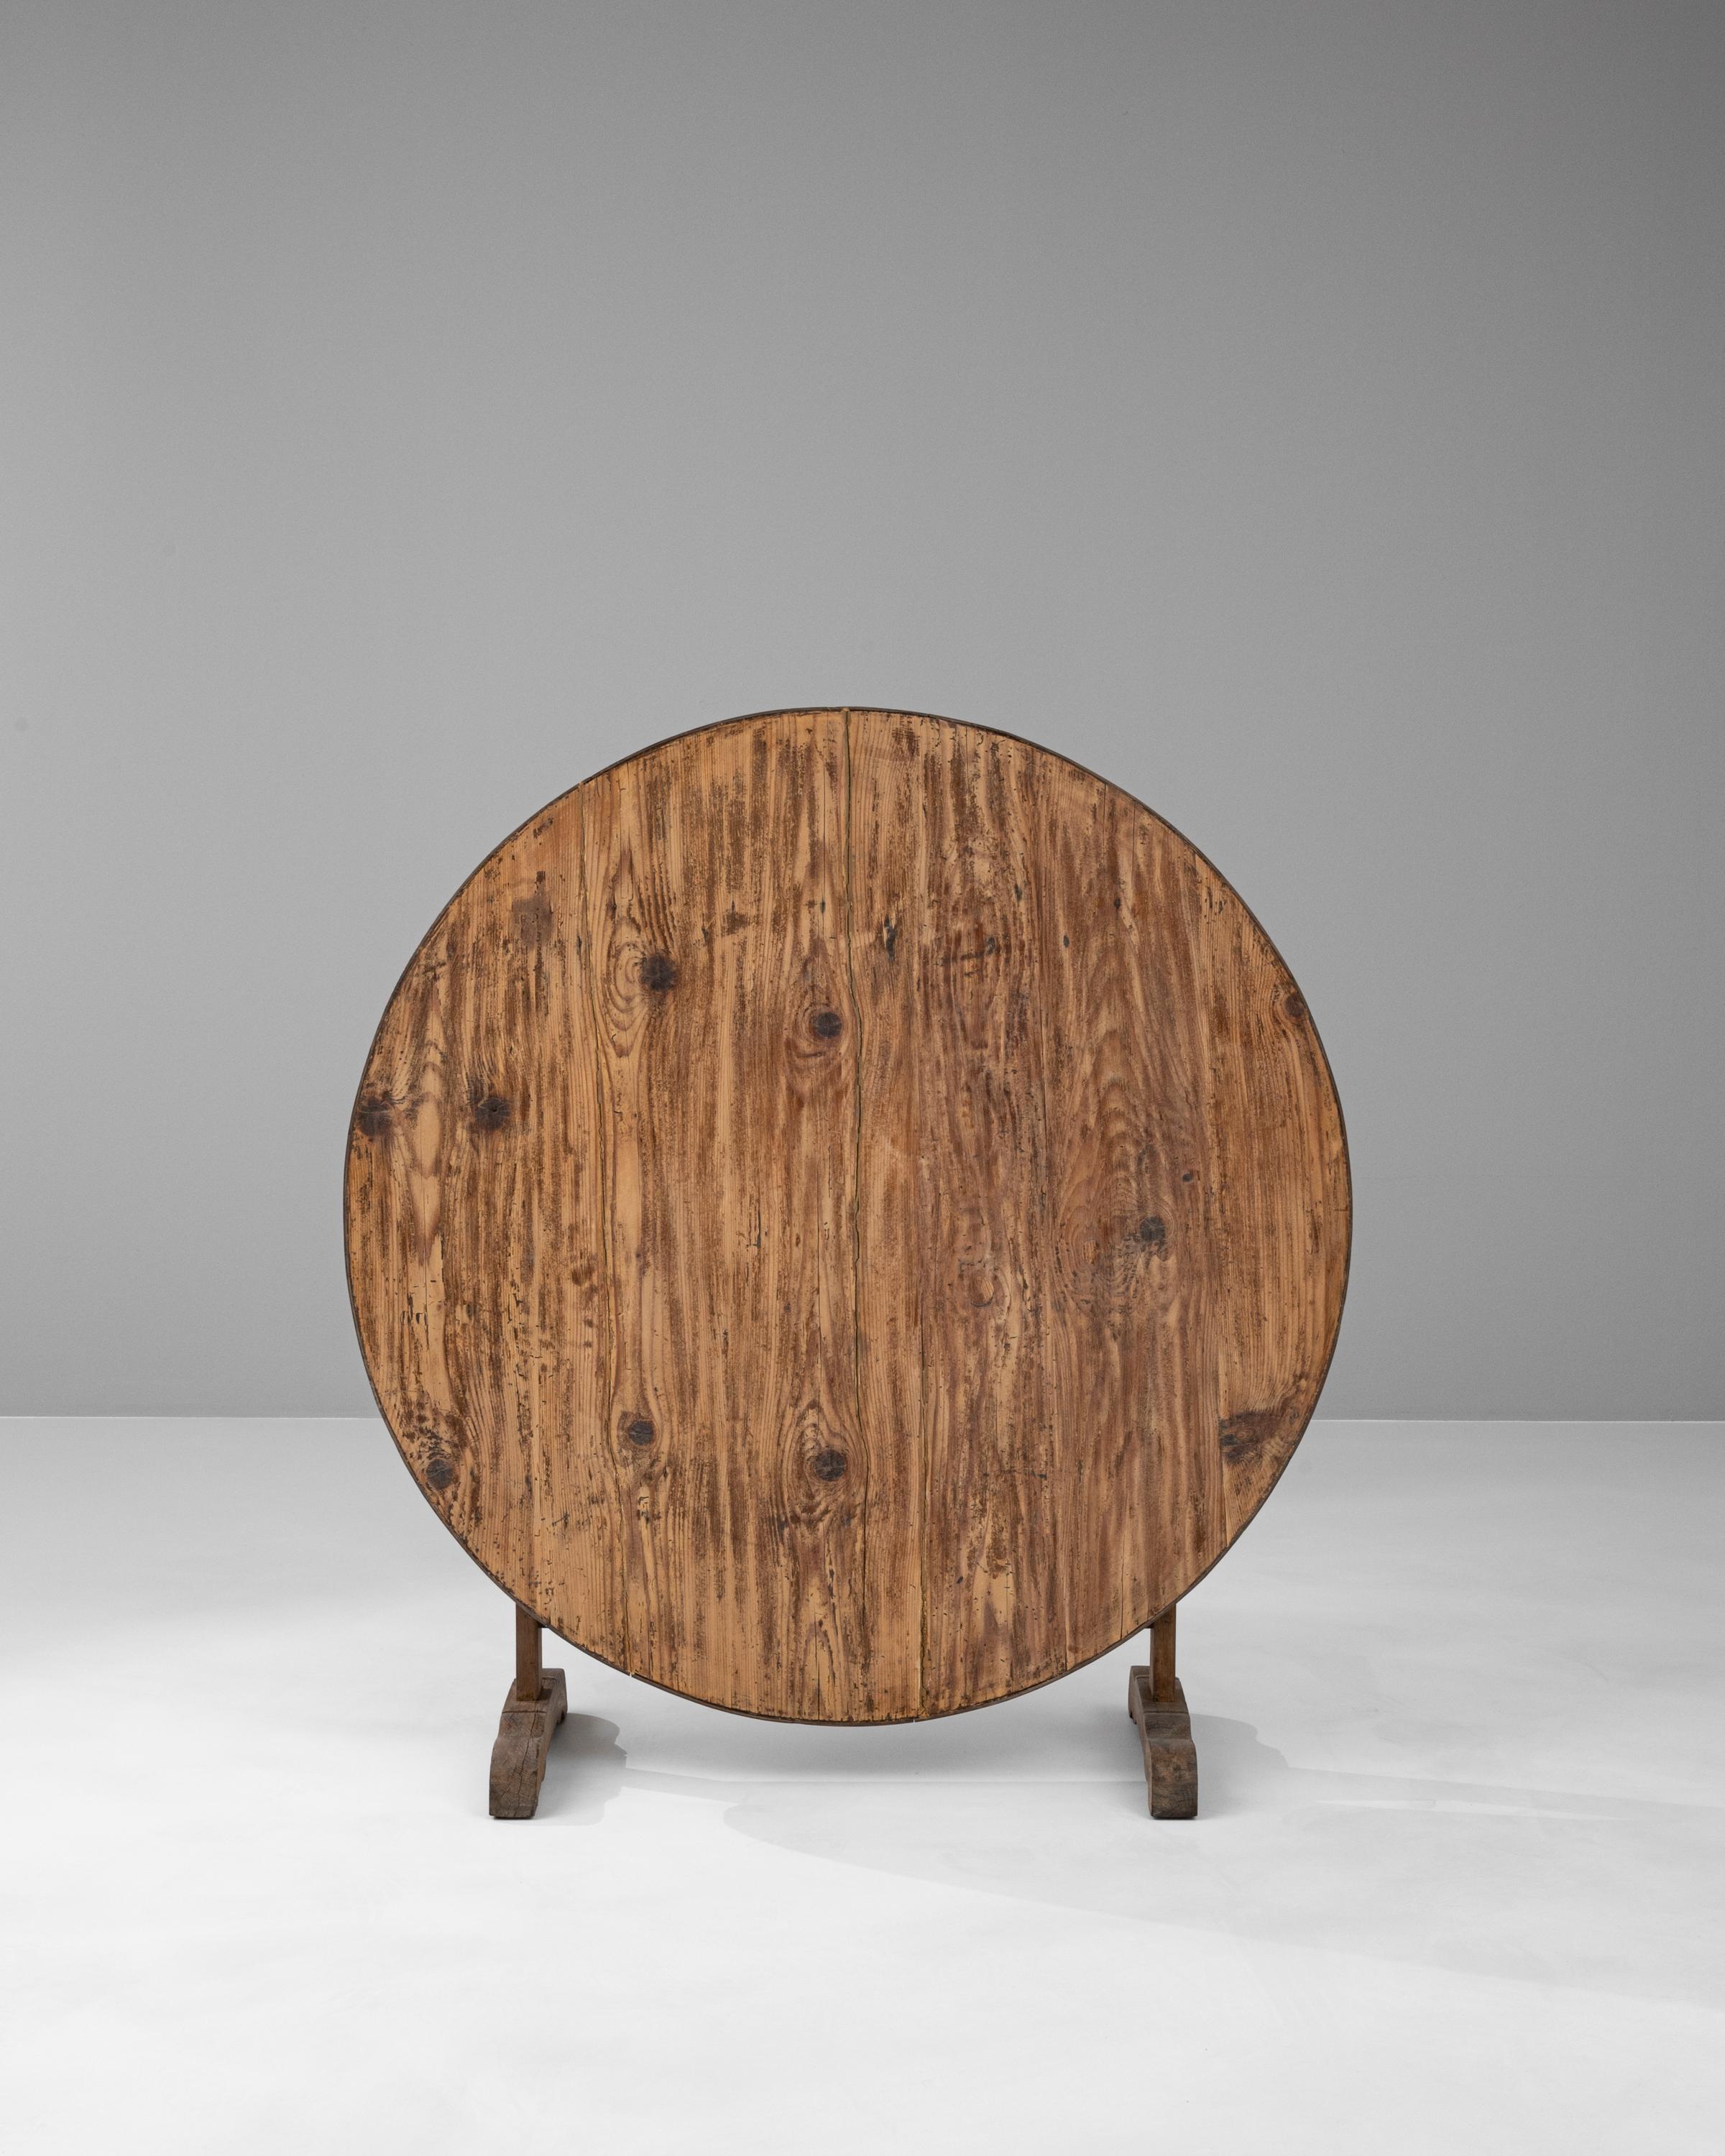 Embrace the art of oenophilia with our 19th Century French Wooden Wine Tasting Table, a piece steeped in tradition and designed for the connoisseur. This authentic table has witnessed countless wine tastings, with its circular top ideally shaped to